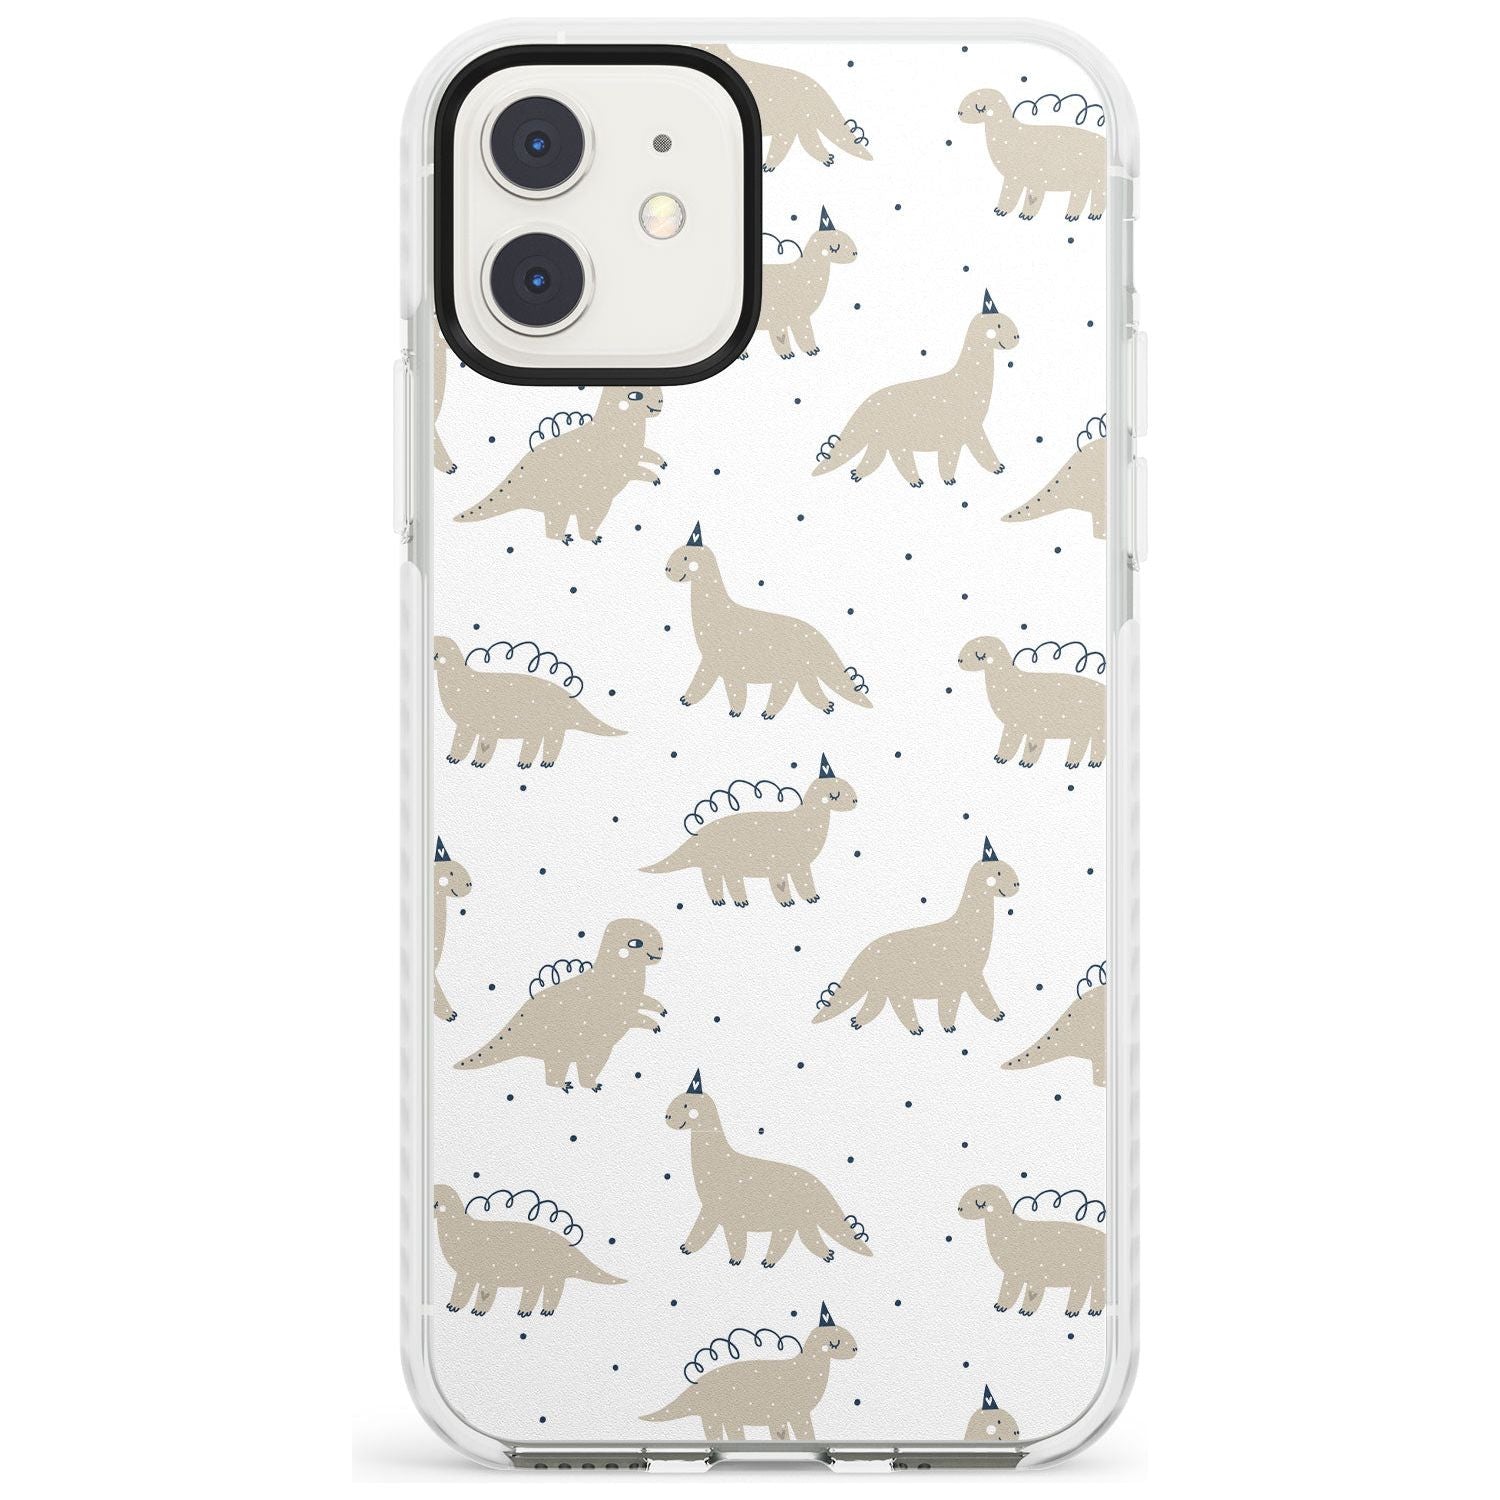 Adorable Dinosaurs Pattern Impact Phone Case for iPhone 11